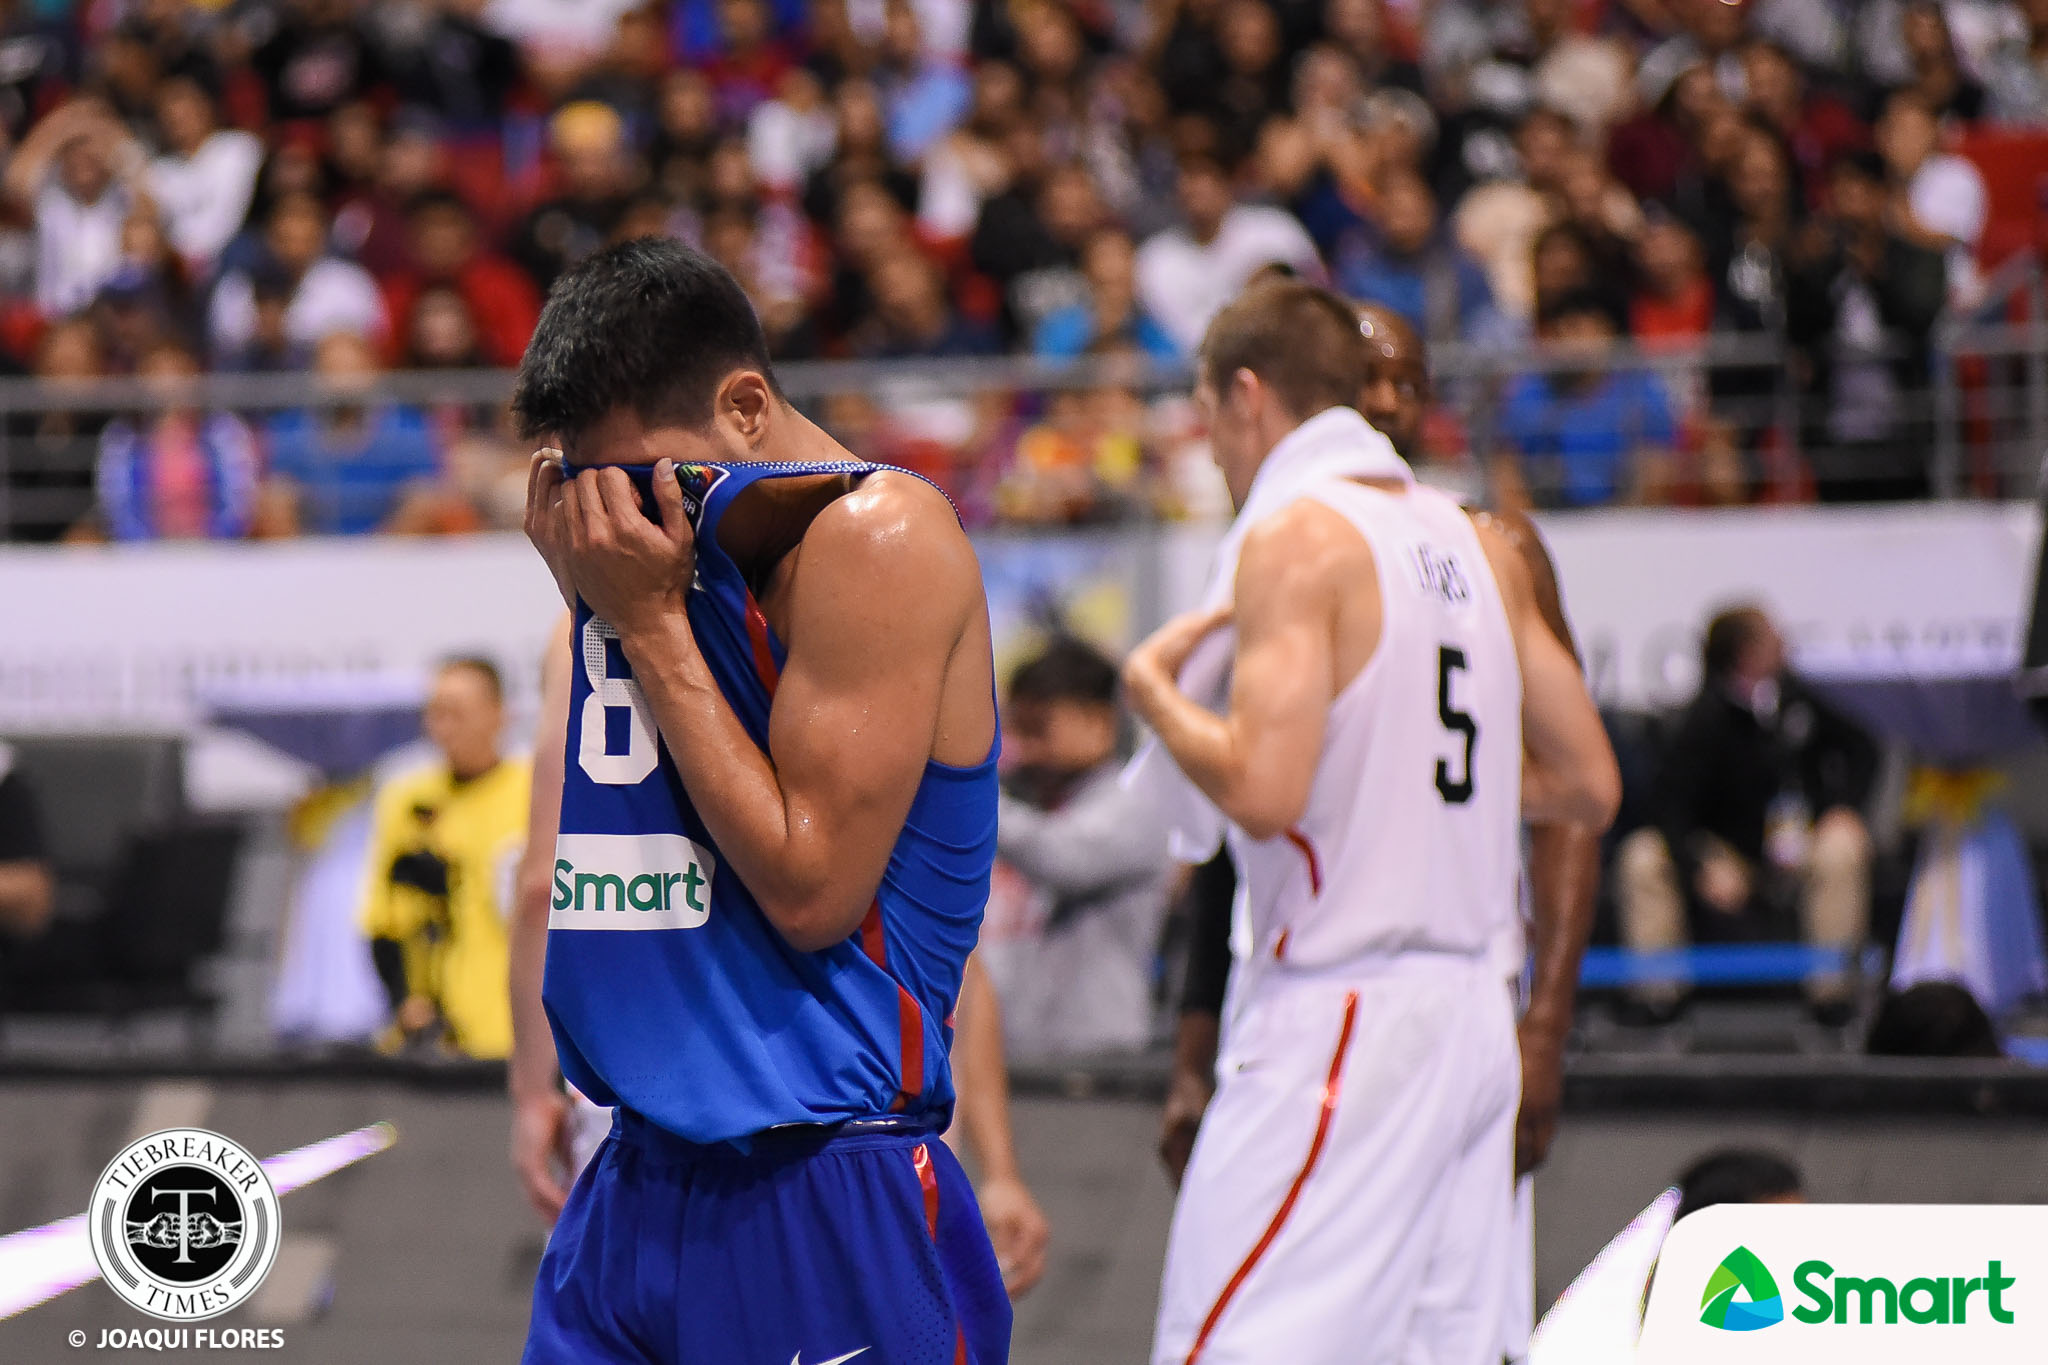 FIBA-3x3-World-Cup-Philippines-vs.-Canada-Rosario-0692 Troy Rosario hopes for better 3x3 program as it might lead to Olympic berth 2018 FIBA 3X3 World Cup 3x3 Basketball Gilas Pilipinas News  - philippine sports news